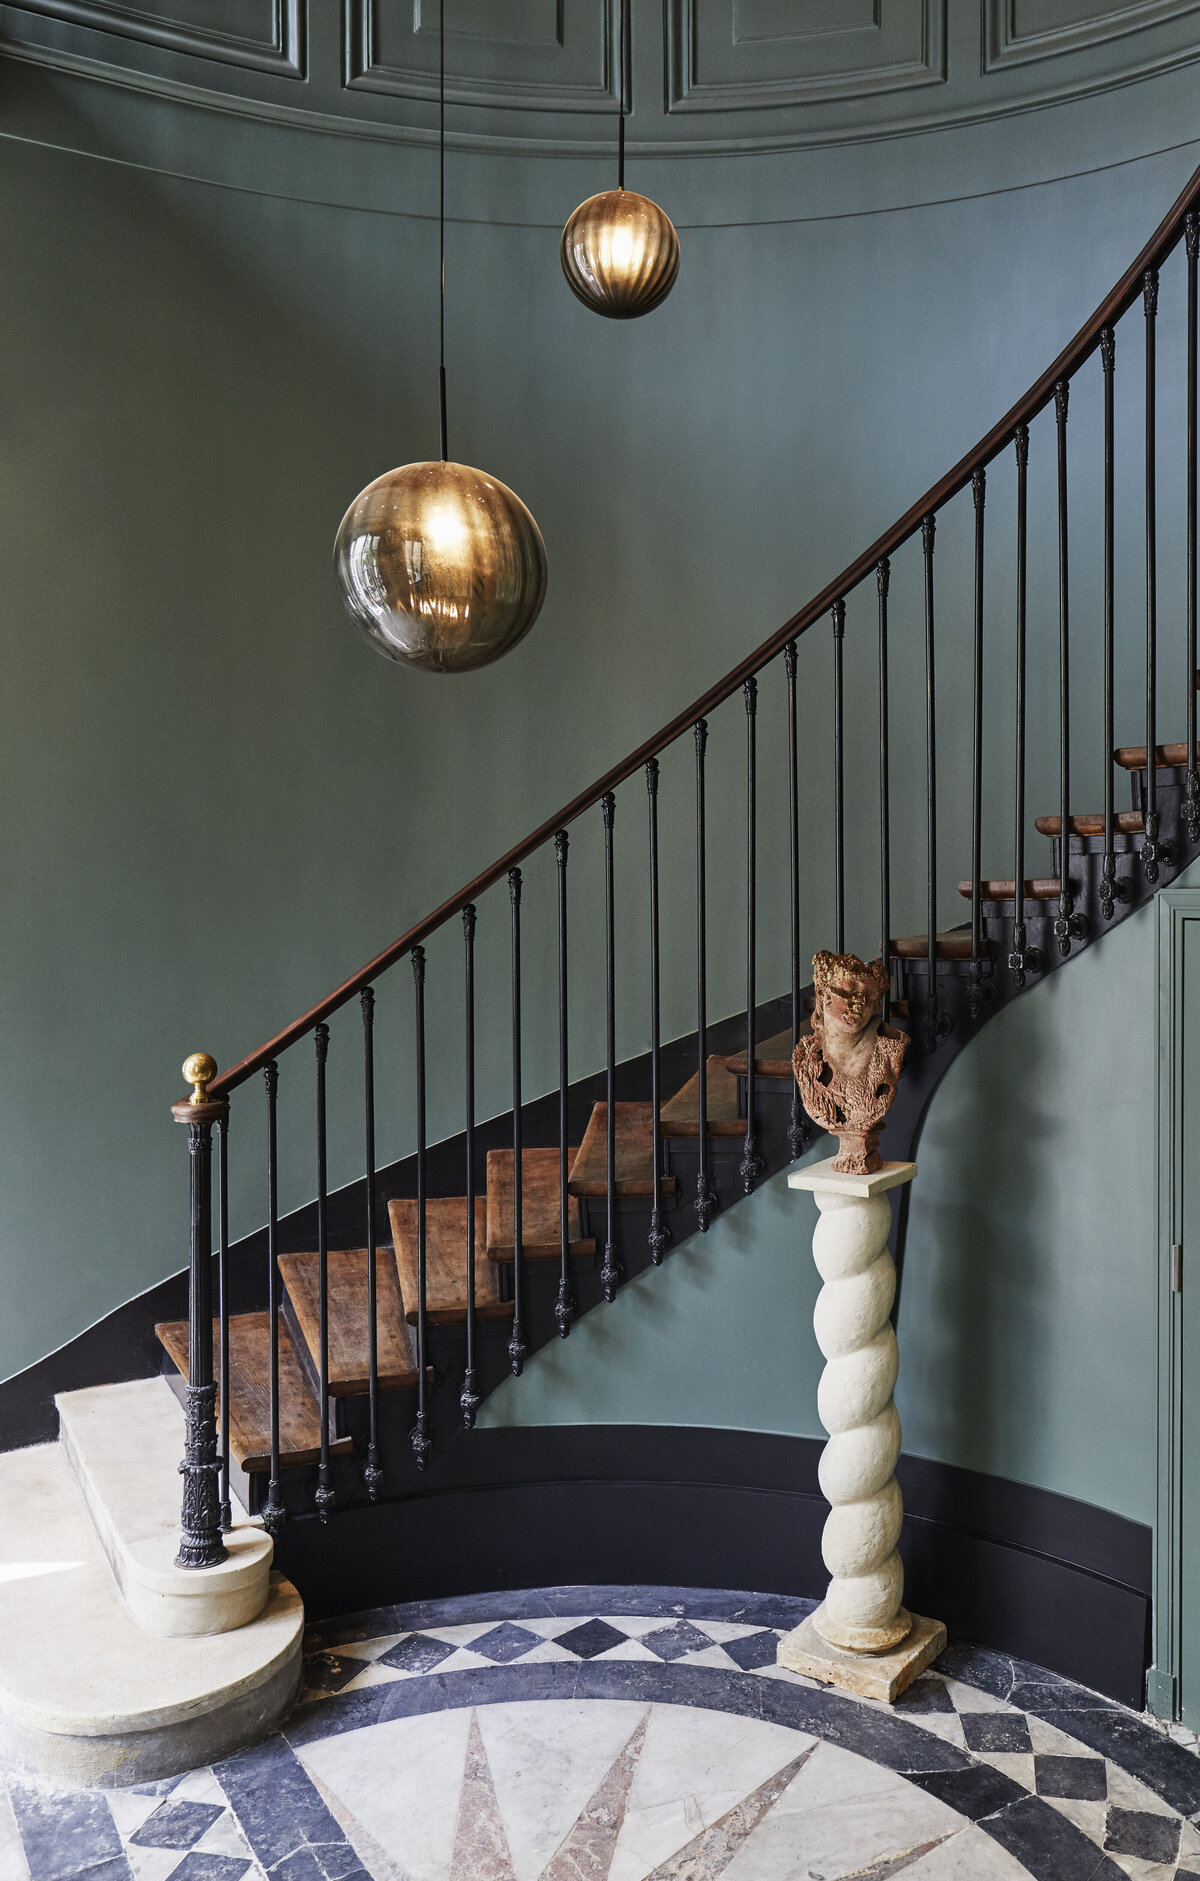 Parisian stairwell with marble floor, staircase with wooden treads, and  metal handrail, teal painted walls